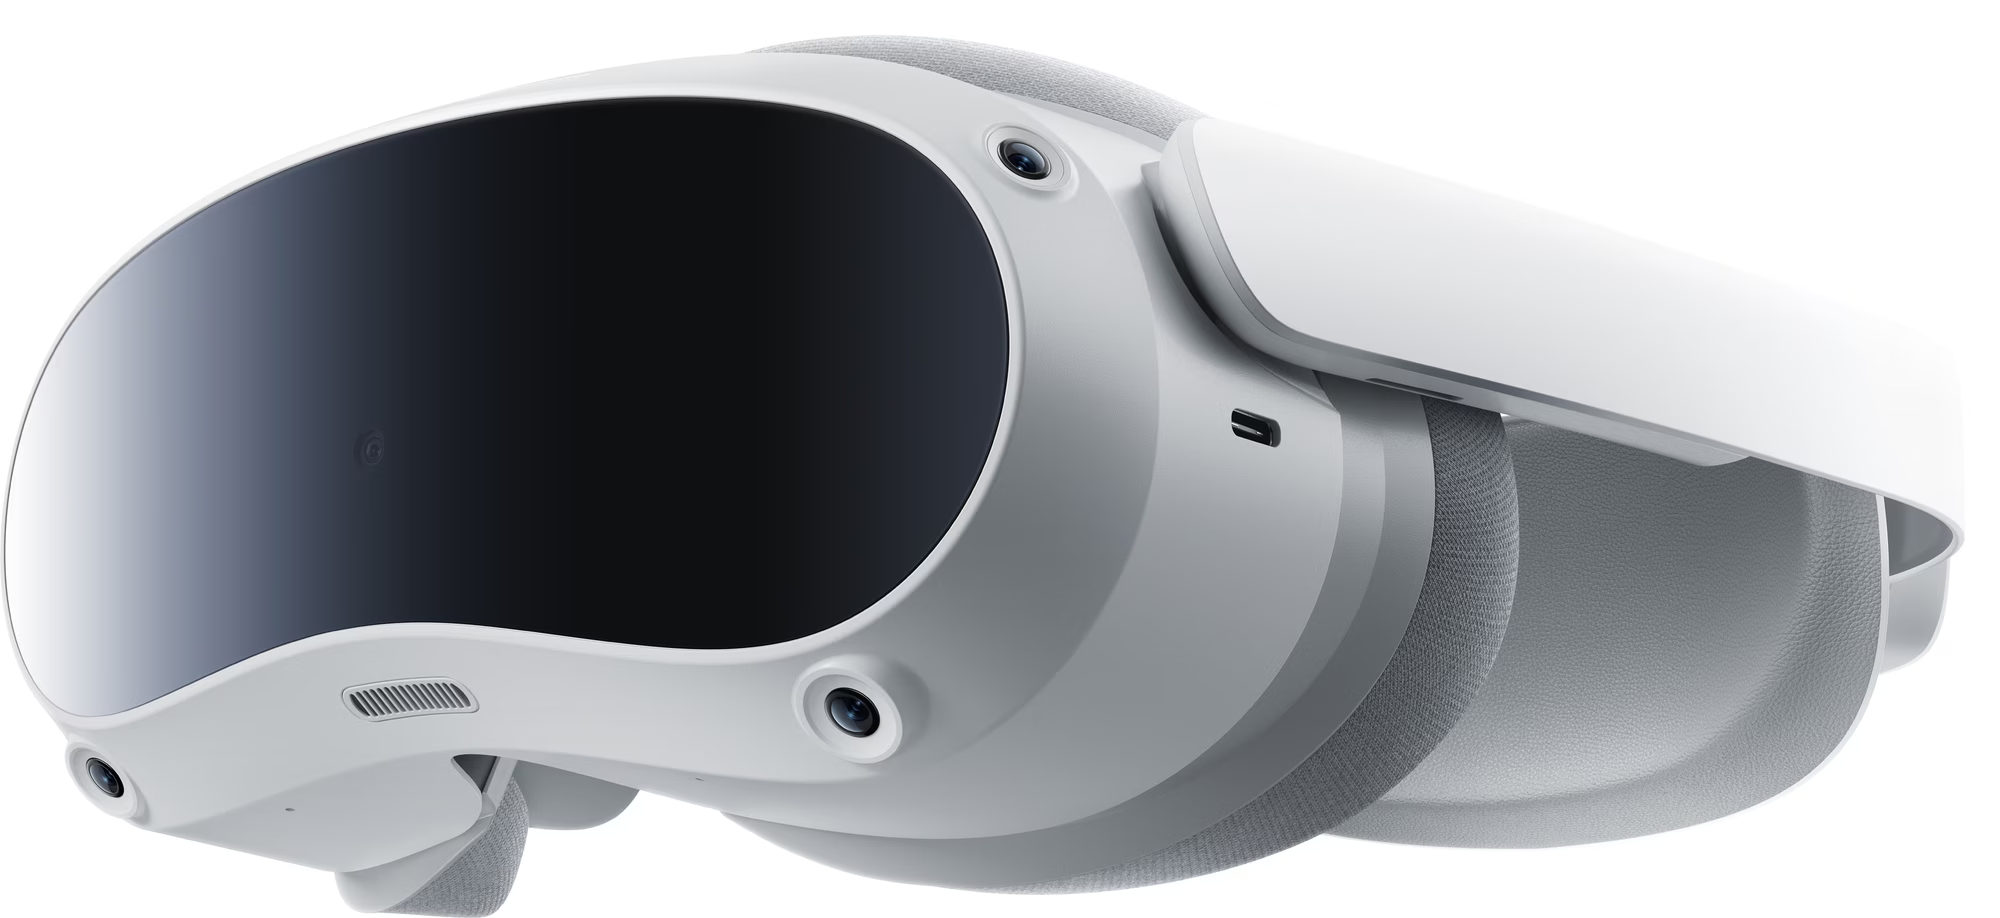 PICO 4 All-in-One VR Headset - Flight Experience Singapore